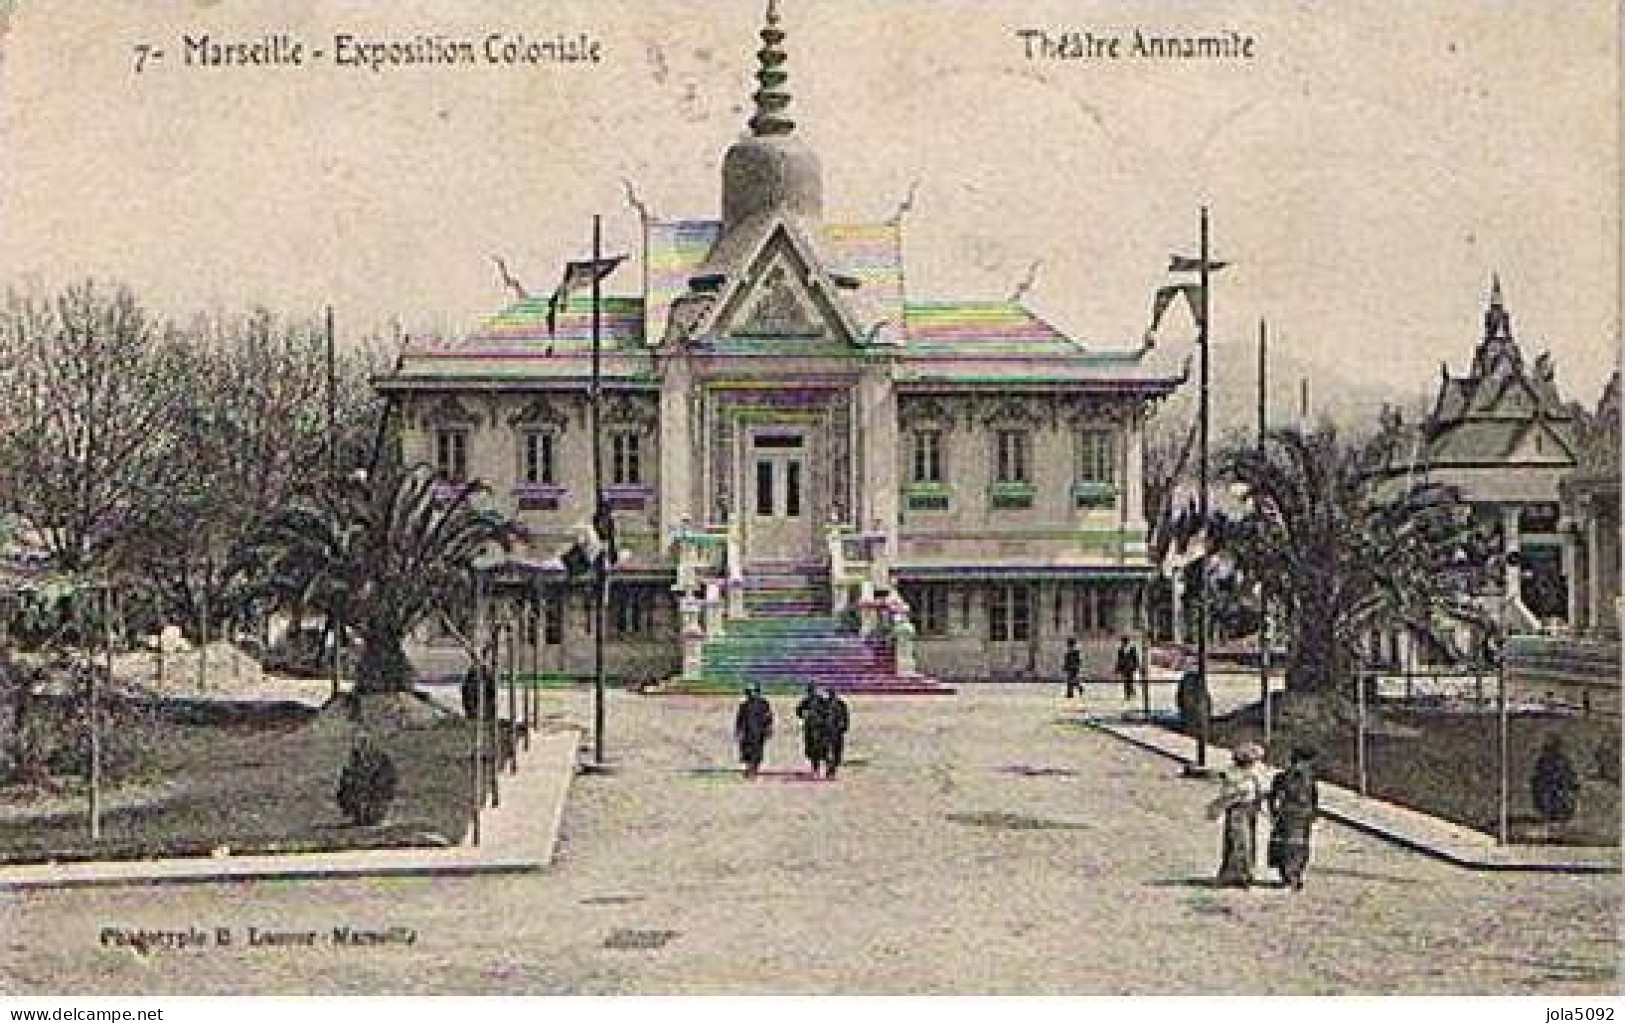 13 - MARSEILLE - Exposition Coloniale - Théâtre Annamite - Expositions Coloniales 1906 - 1922